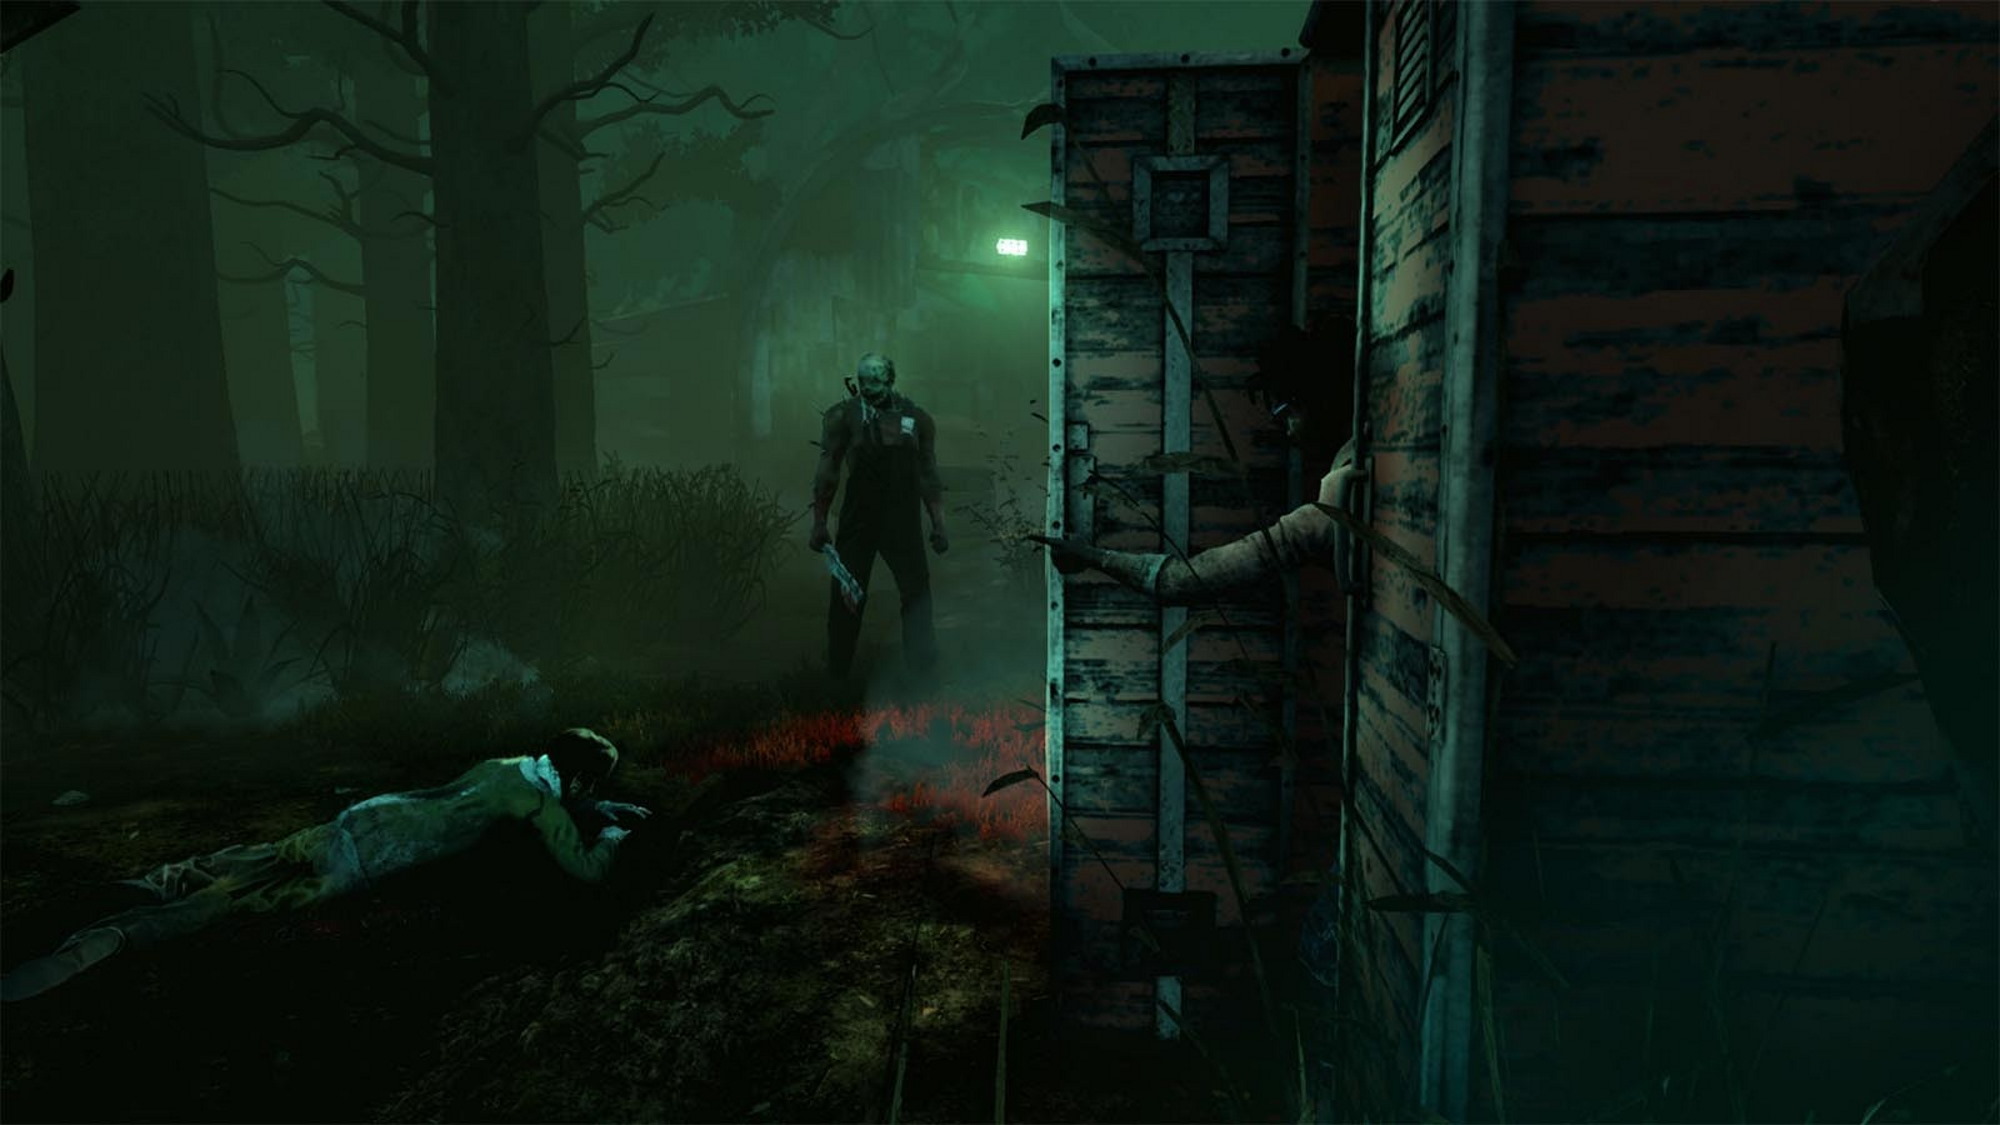 The Demogorgon returns to the Upside Down as Stranger Things leaves Dead by  Daylight